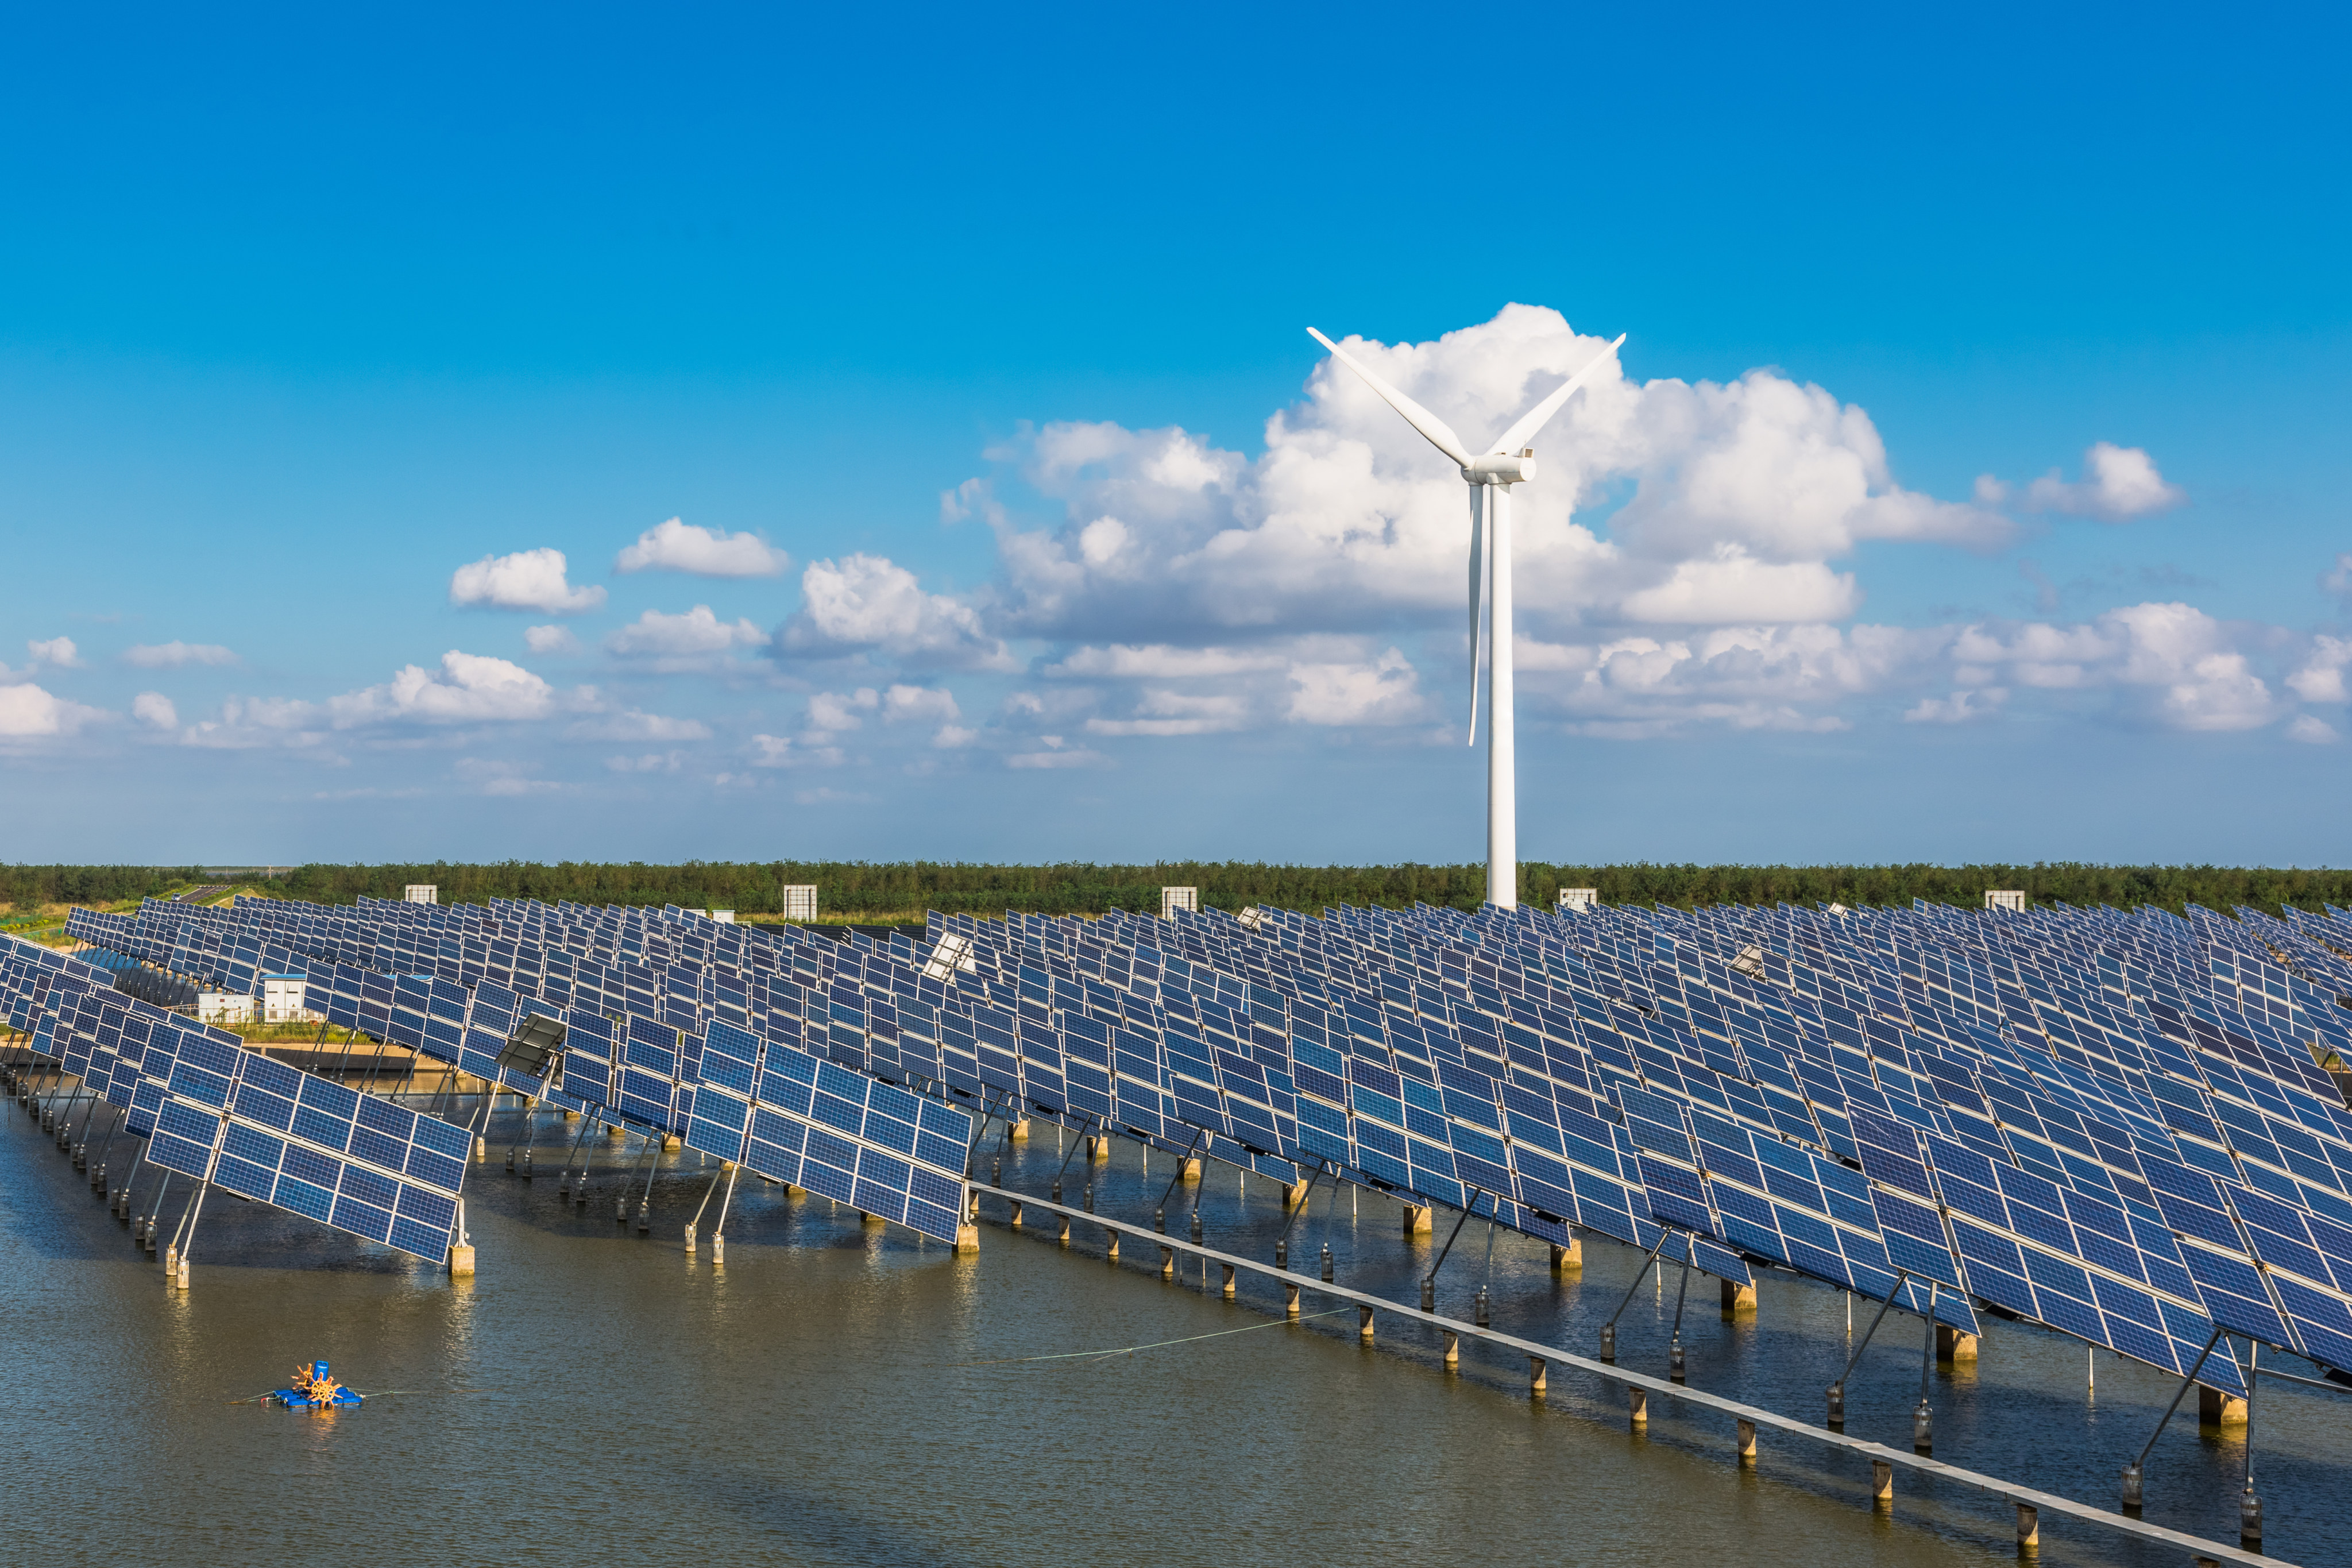 Massive investments in clean power infrastructure are being made by China as the world transitions to greener energy consumption. Photo: Shutterstock